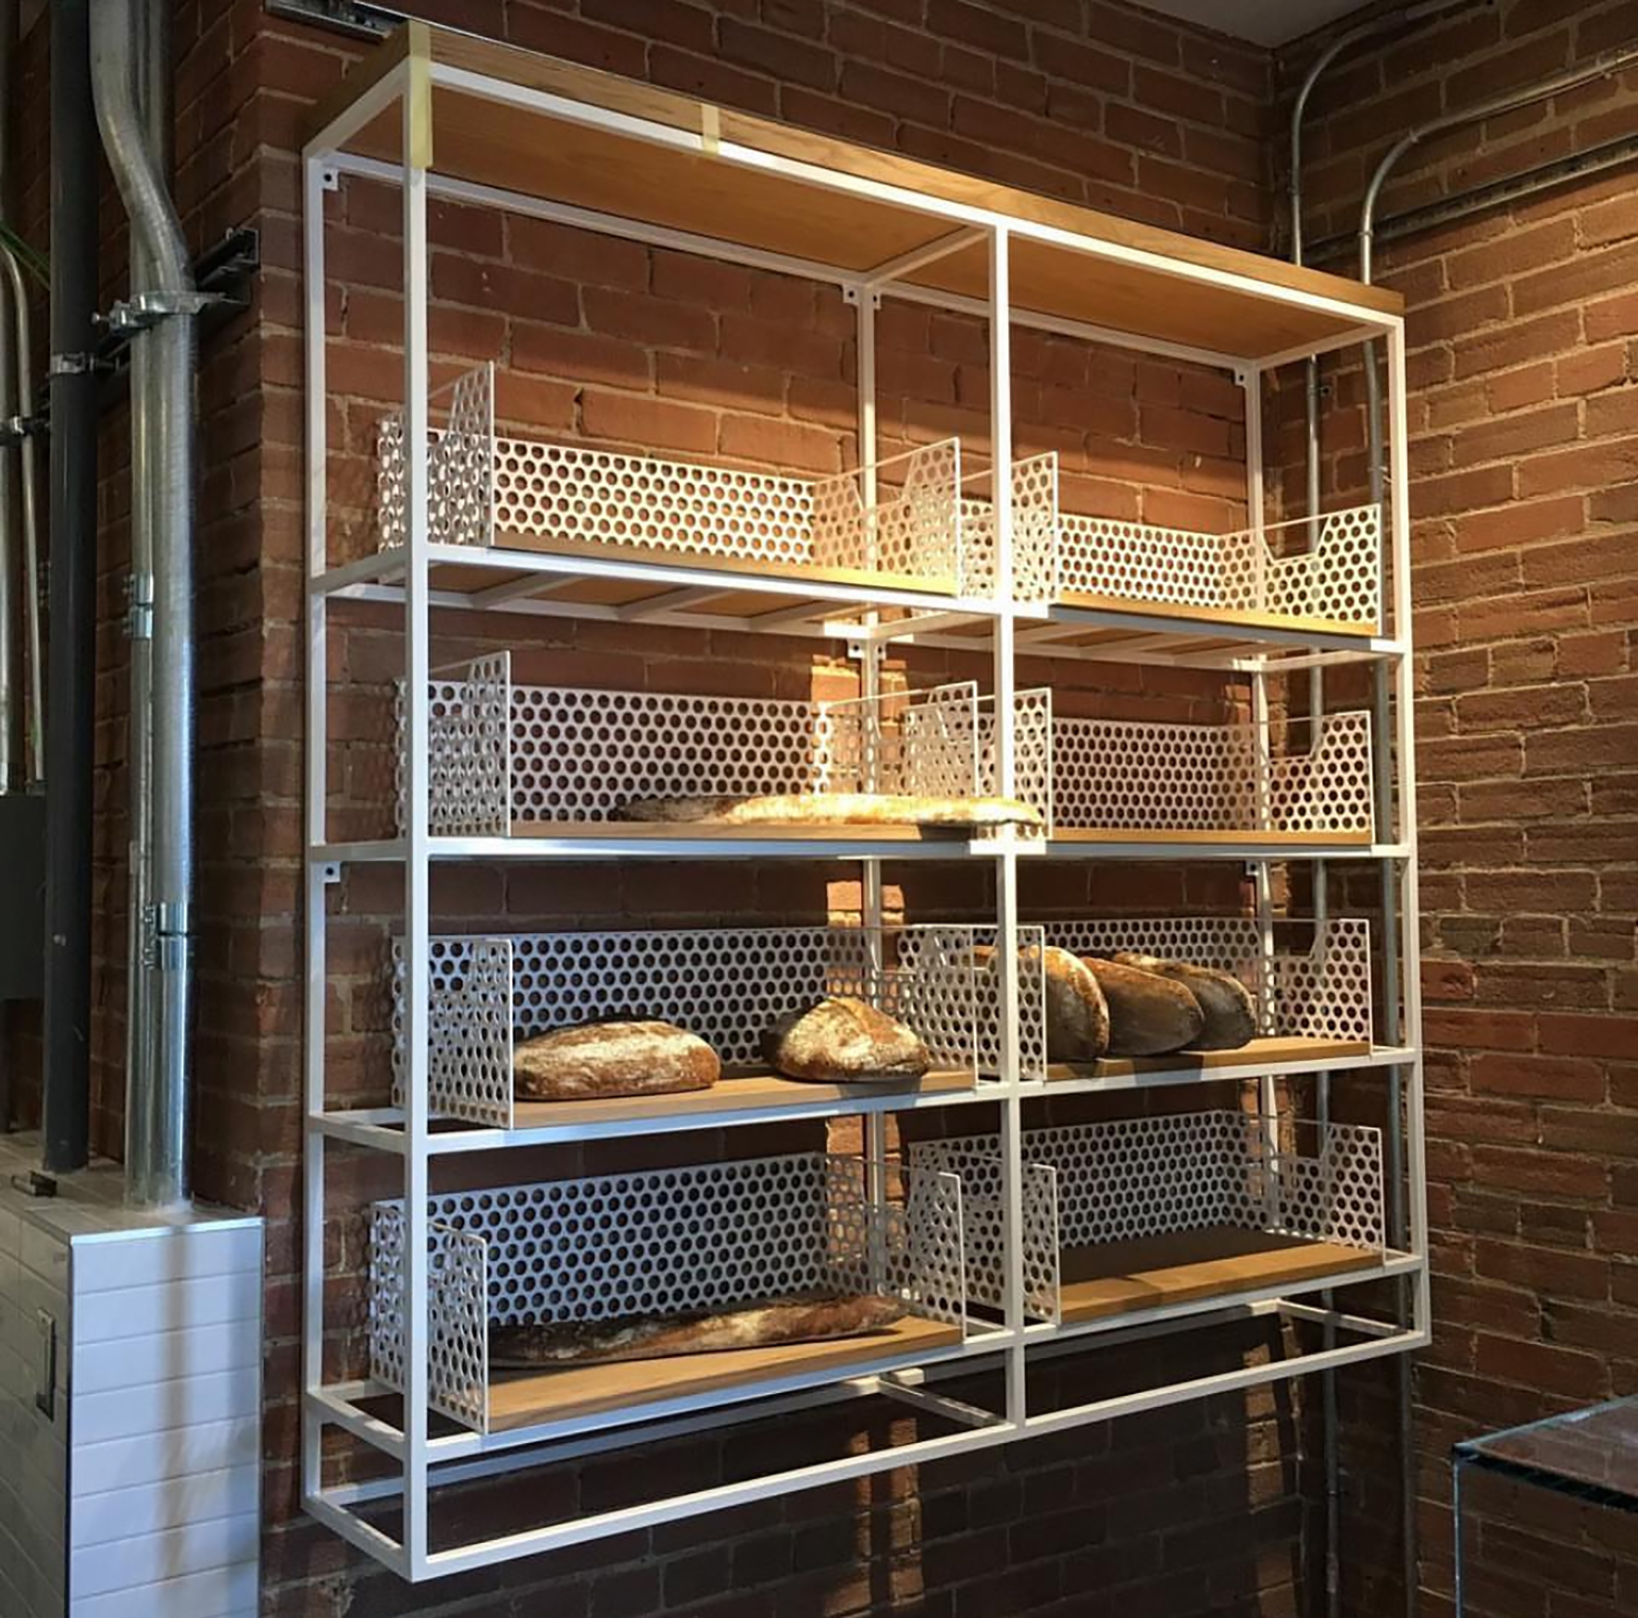 We are custom metal fabrication that can fabricate Custom metal shelving unit for your kitchen